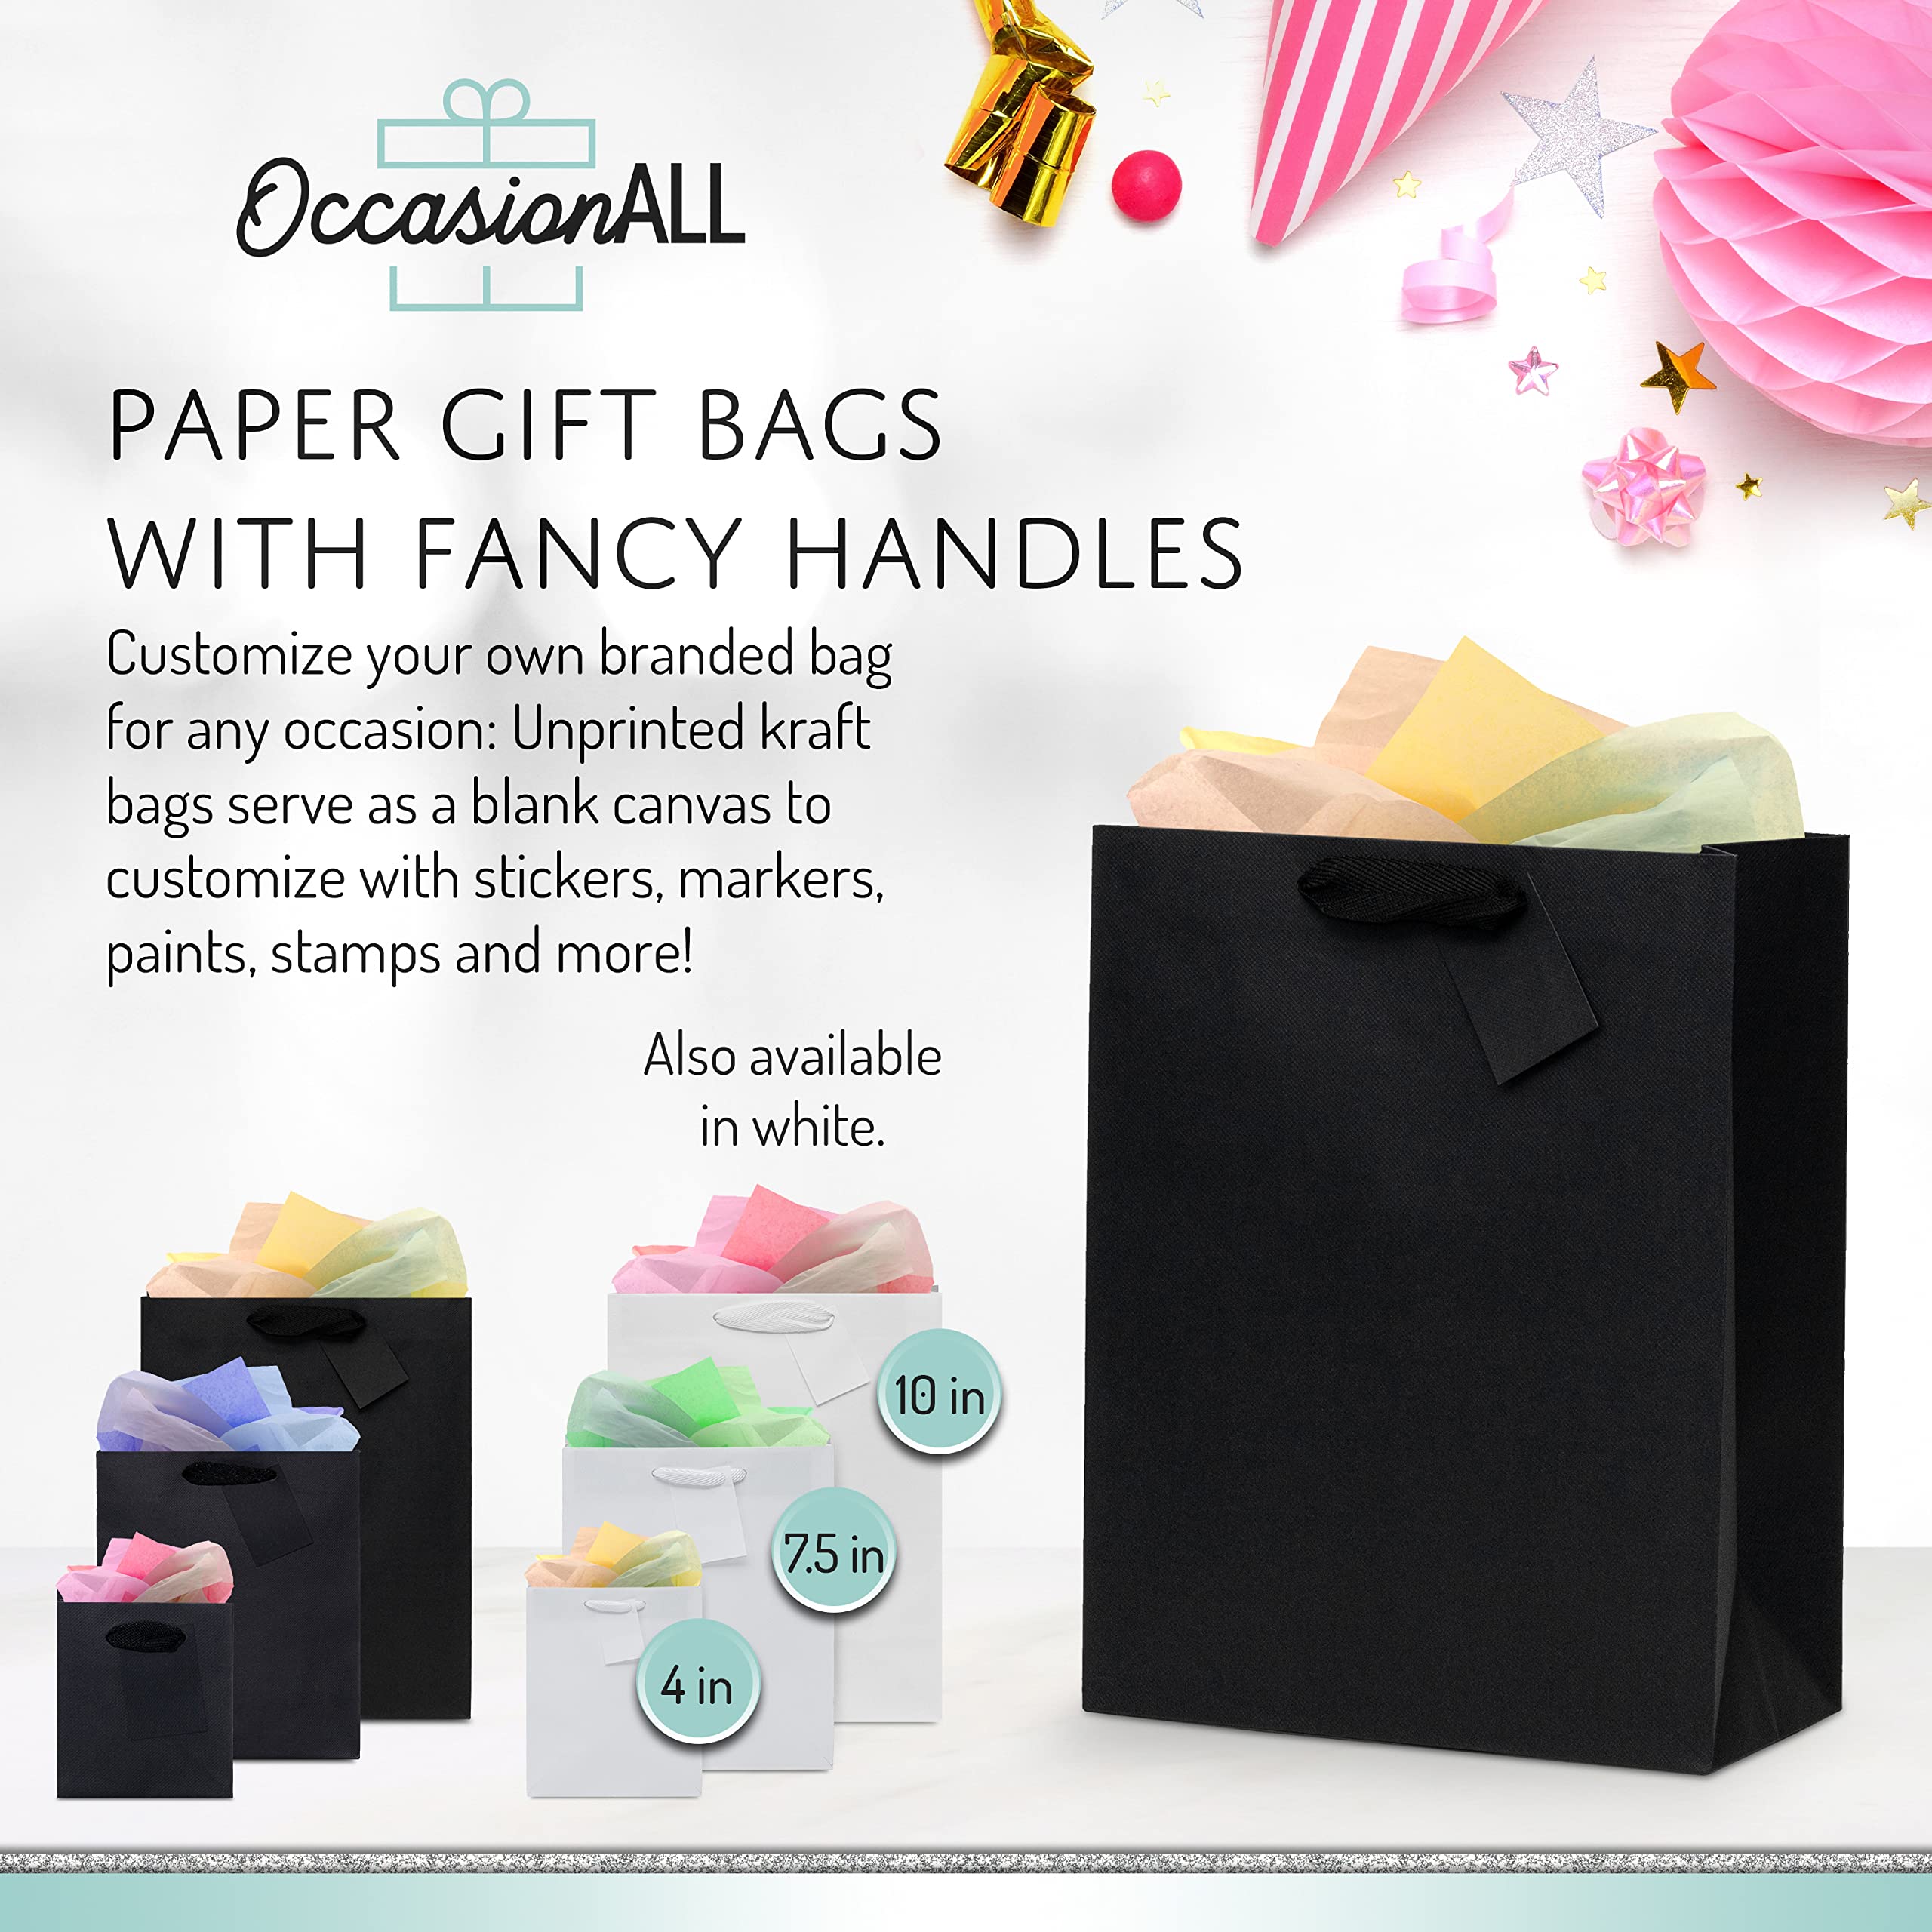 OccasionALL Gift Bags - Designer Paper Wine Bottle Bags with Handle  - Like New